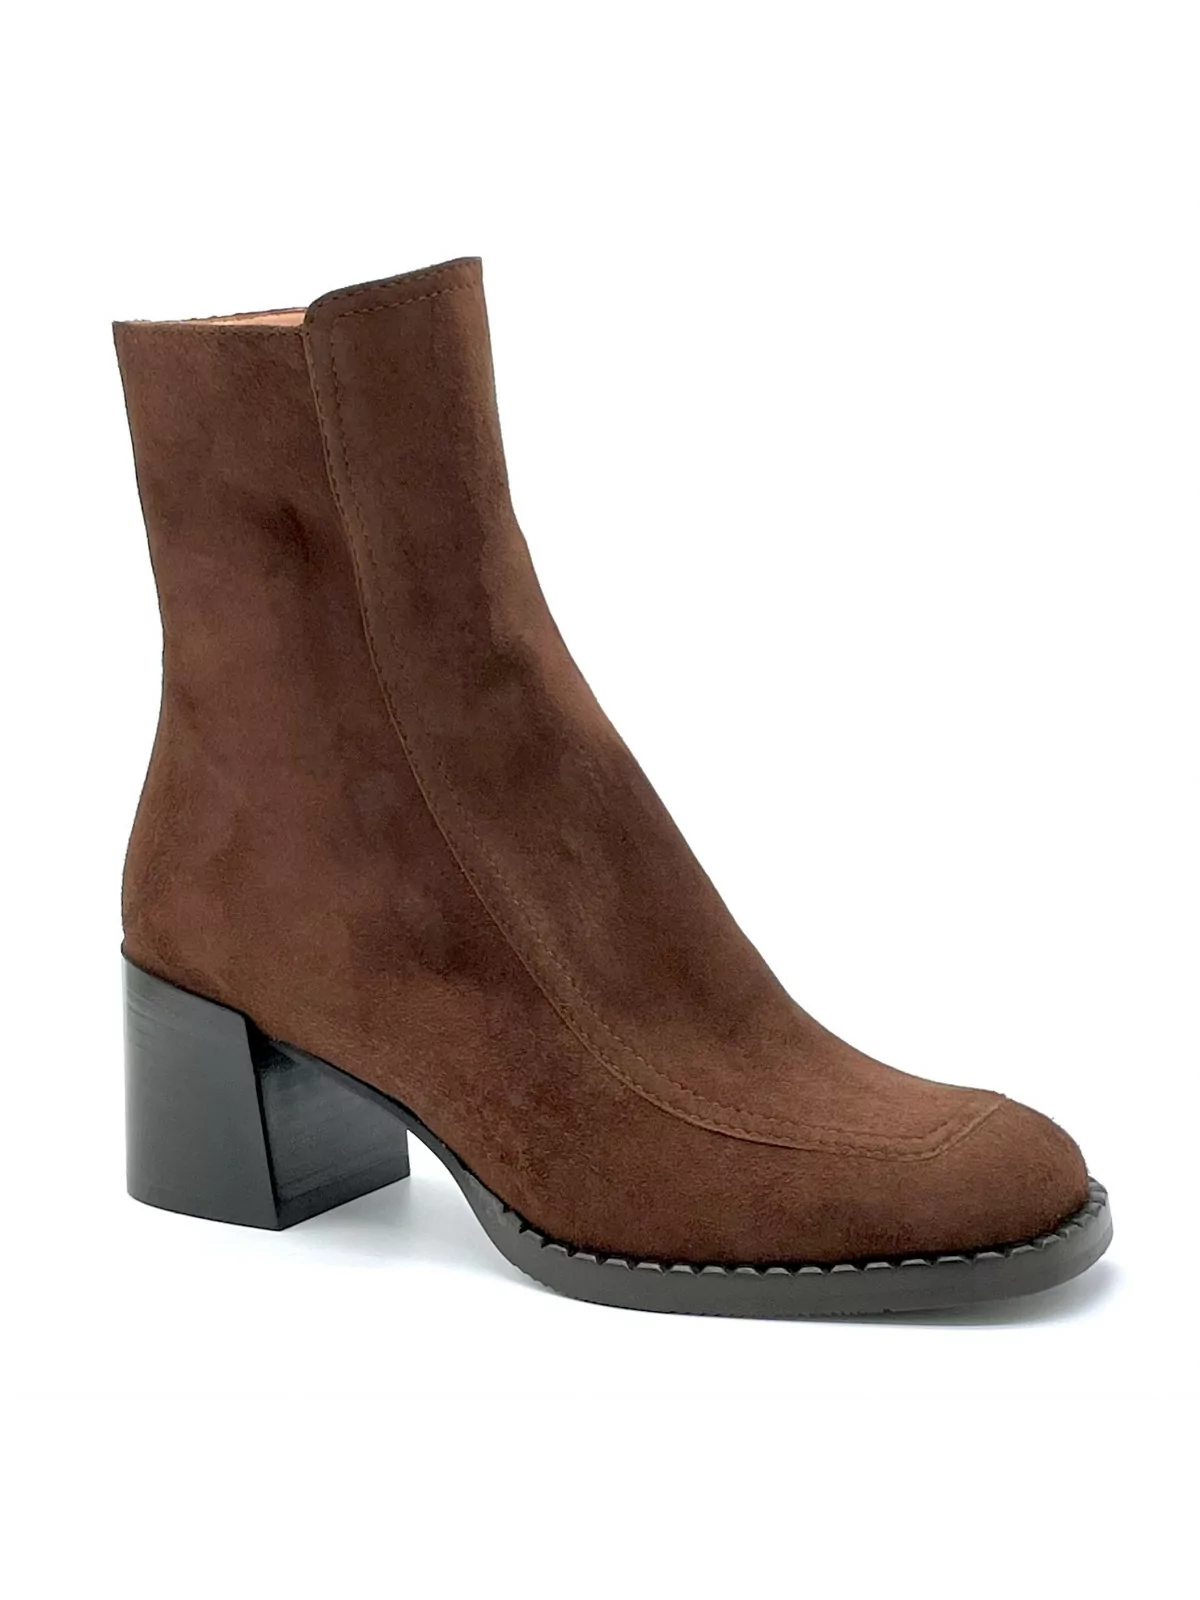 Brown suede boot. Leather lining, rubber sole. 6 cm heel.